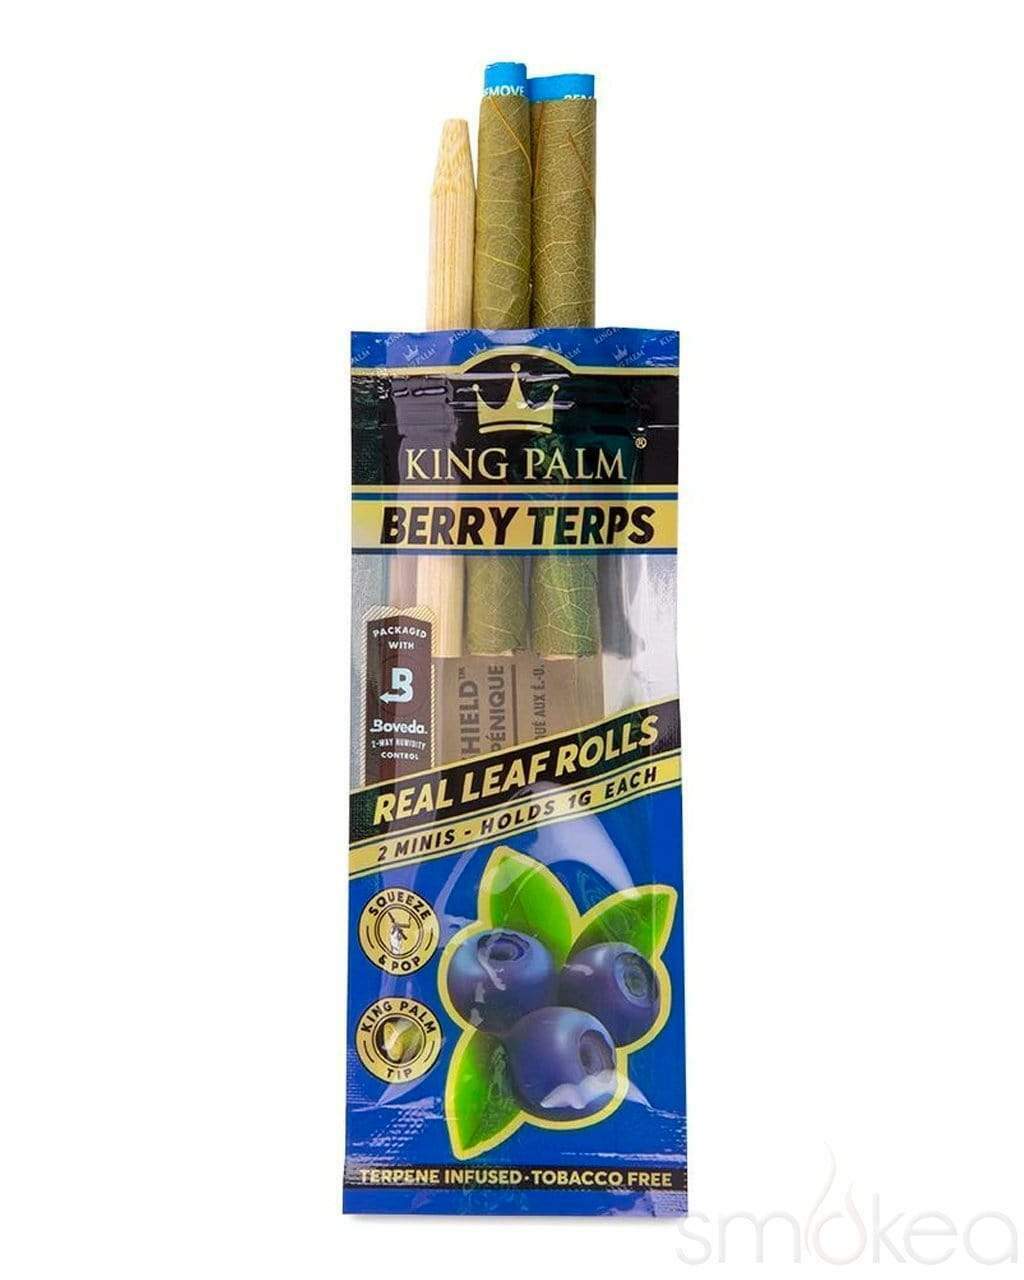 King Palm Wraps Mini 2 per Pack Berry Terps Pack of 1